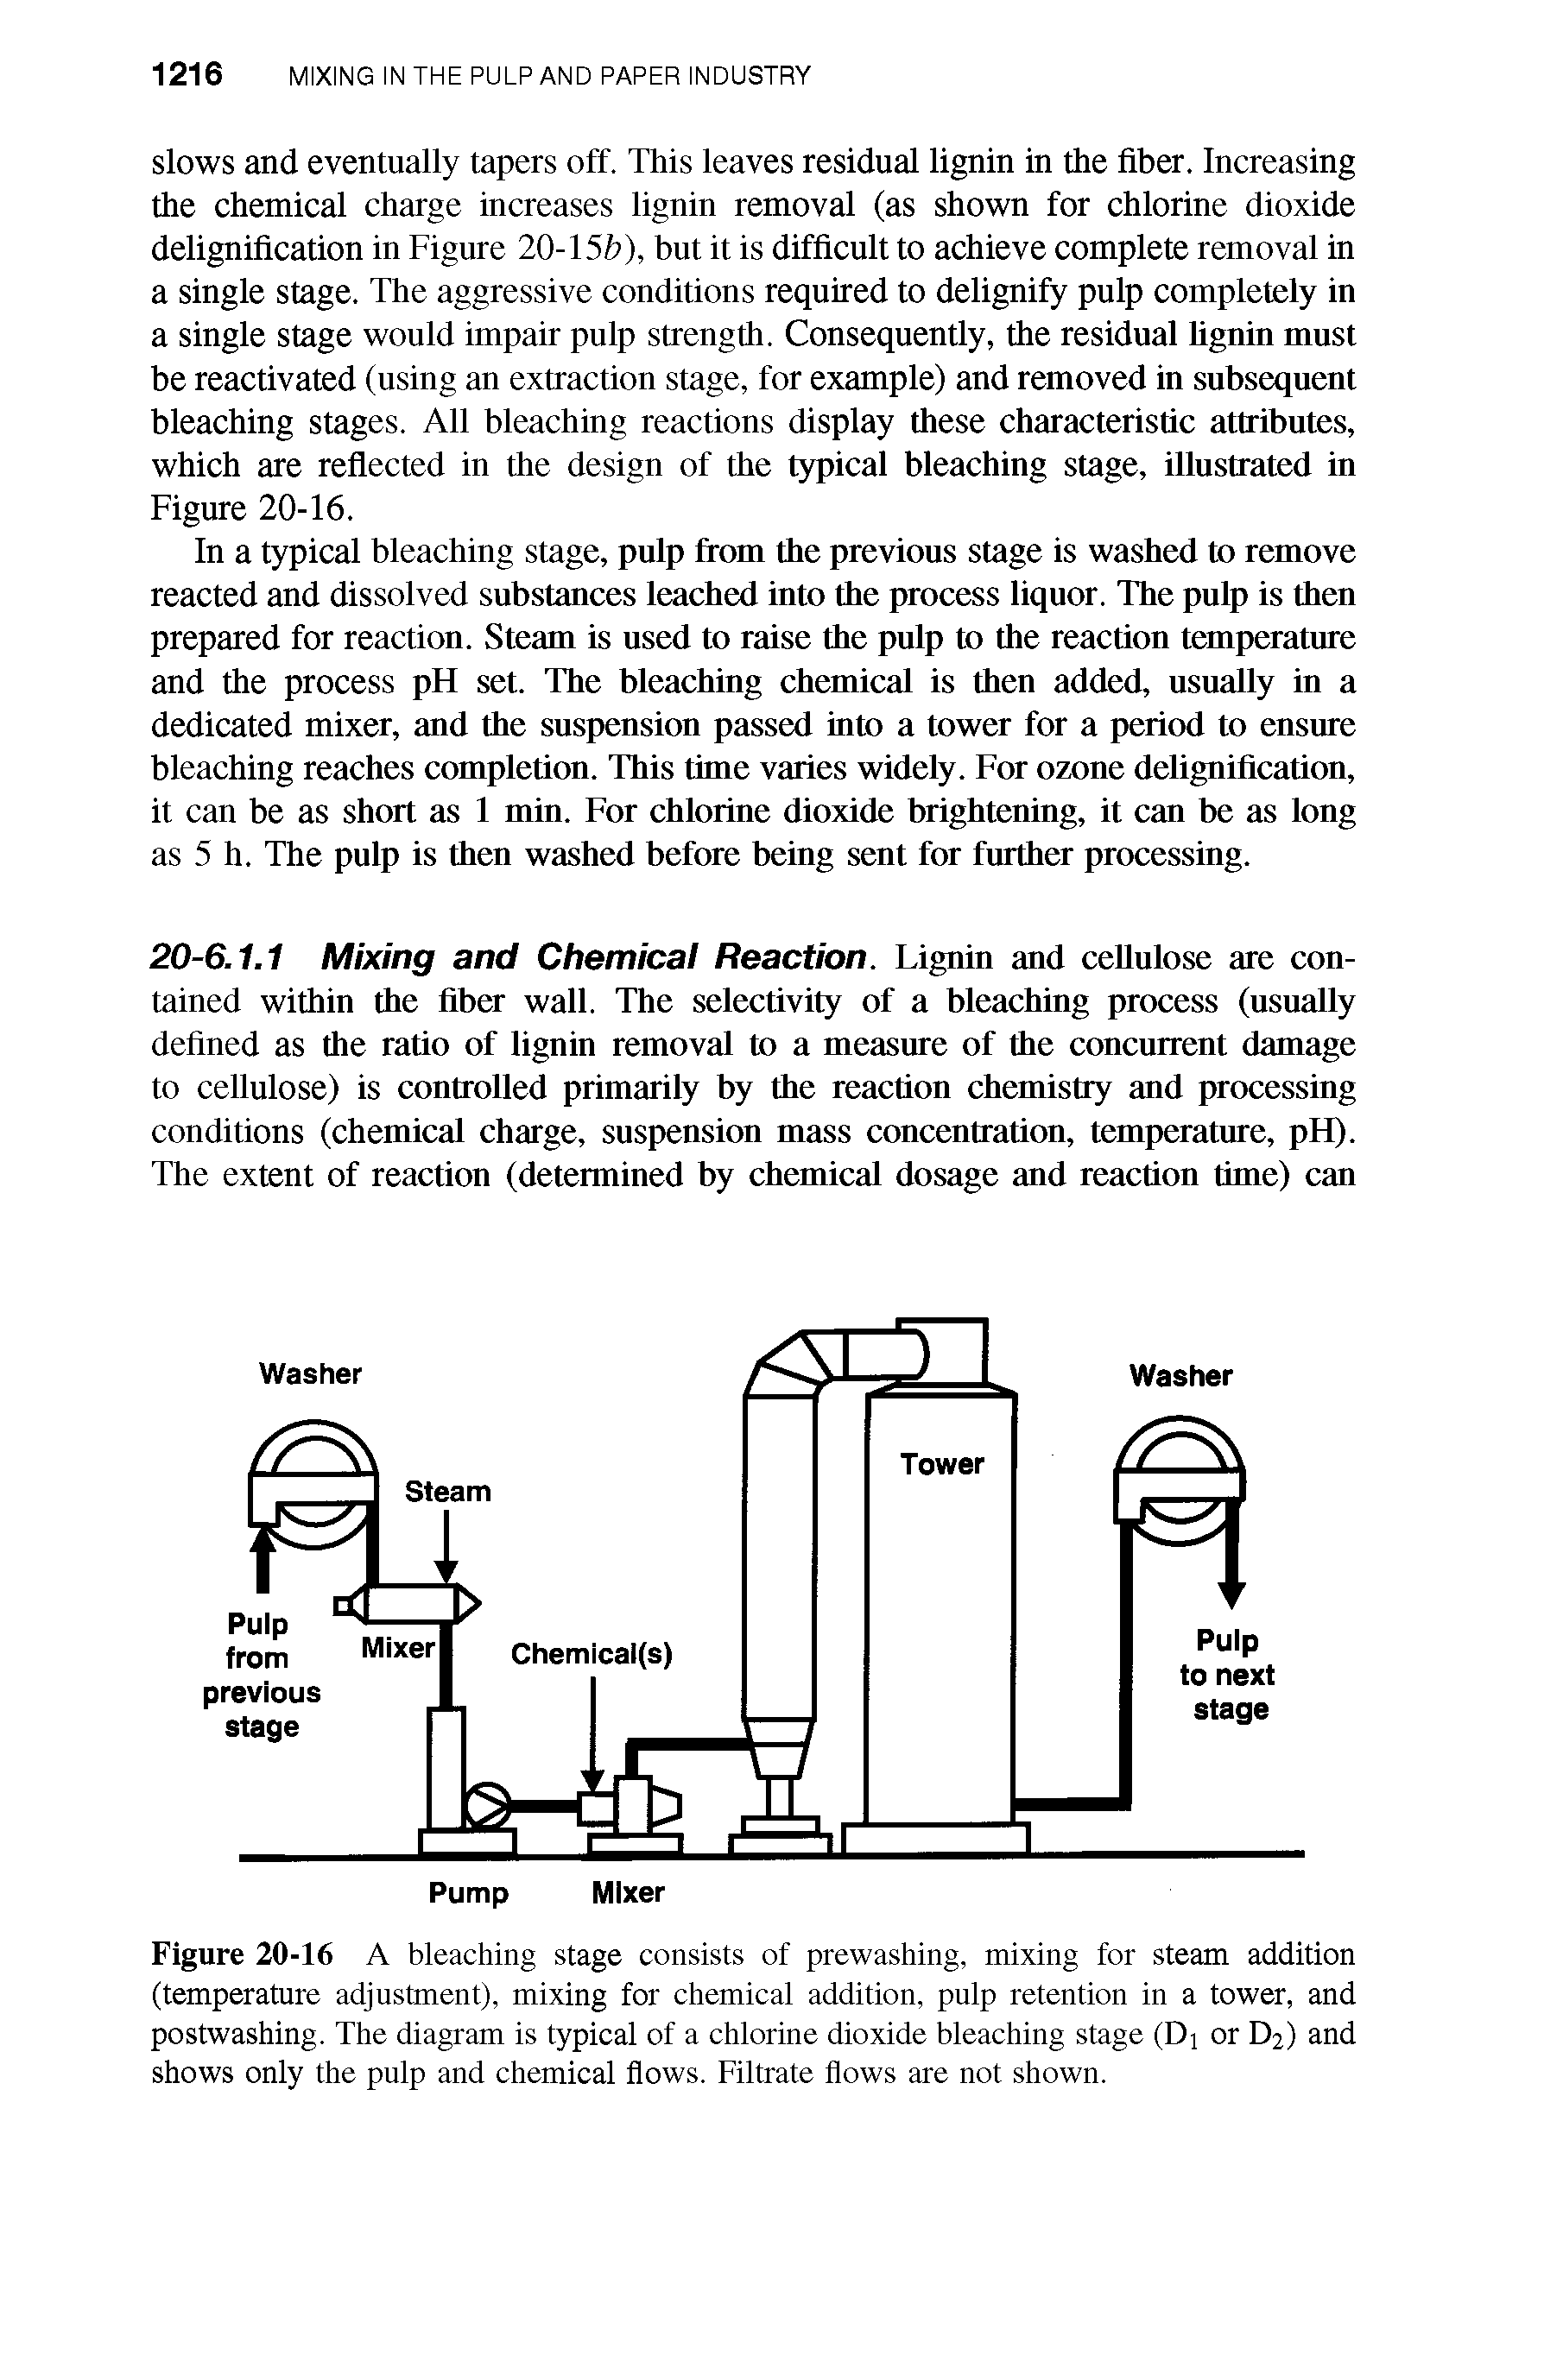 Figure 20-16 A bleaching stage consists of prewashing, mixing for steam addition (temperature adjustment), mixing for chemical addition, pulp retention in a tower, and postwashing. The diagram is typical of a chlorine dioxide bleaching stage (Dj or D2) and shows only the pulp and chemical flows. Filtrate flows are not shown.